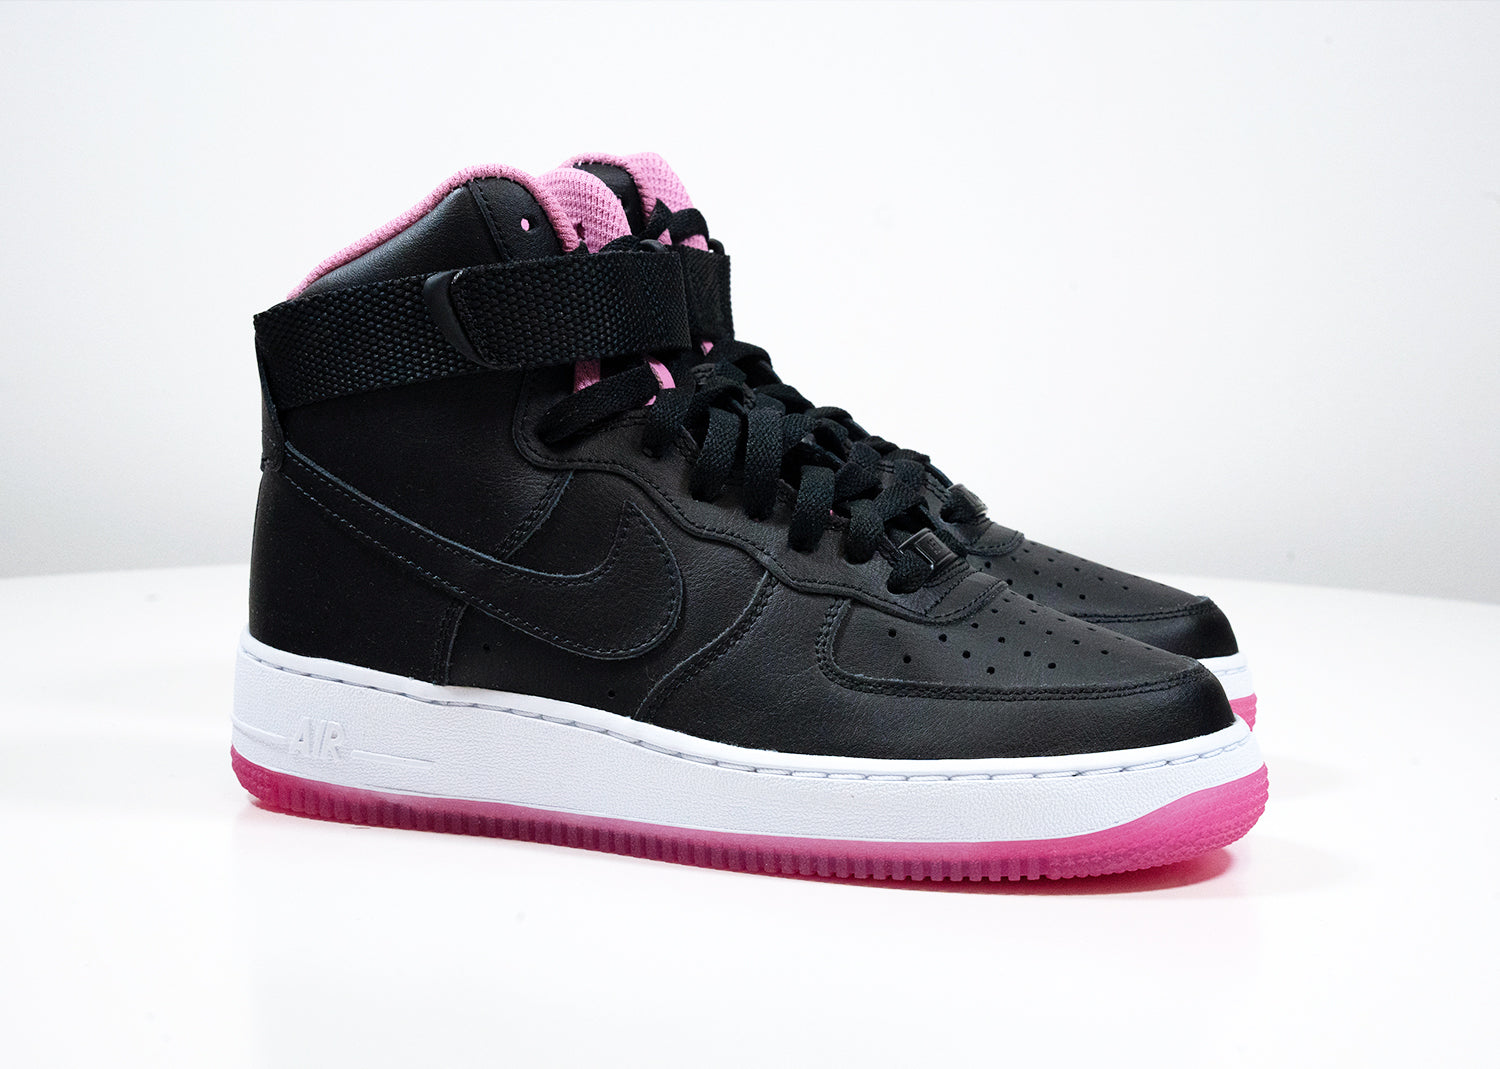 Second Chance - Nike basket running nike shoes High ID Black/pink - 38,5 | NEW